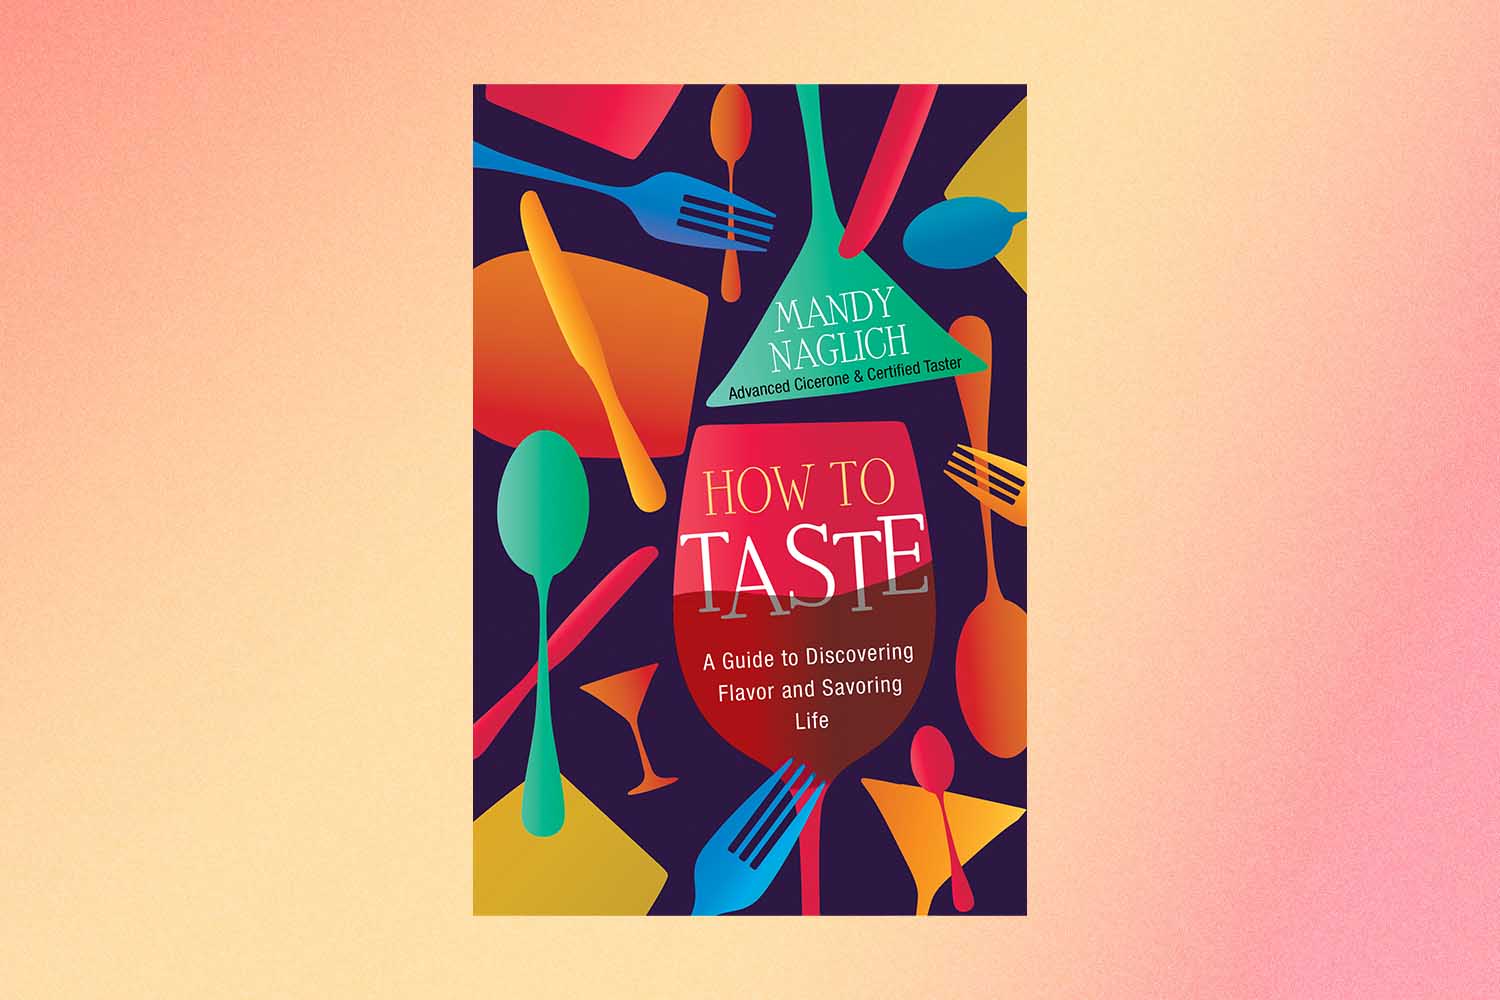 How to Taste book cover